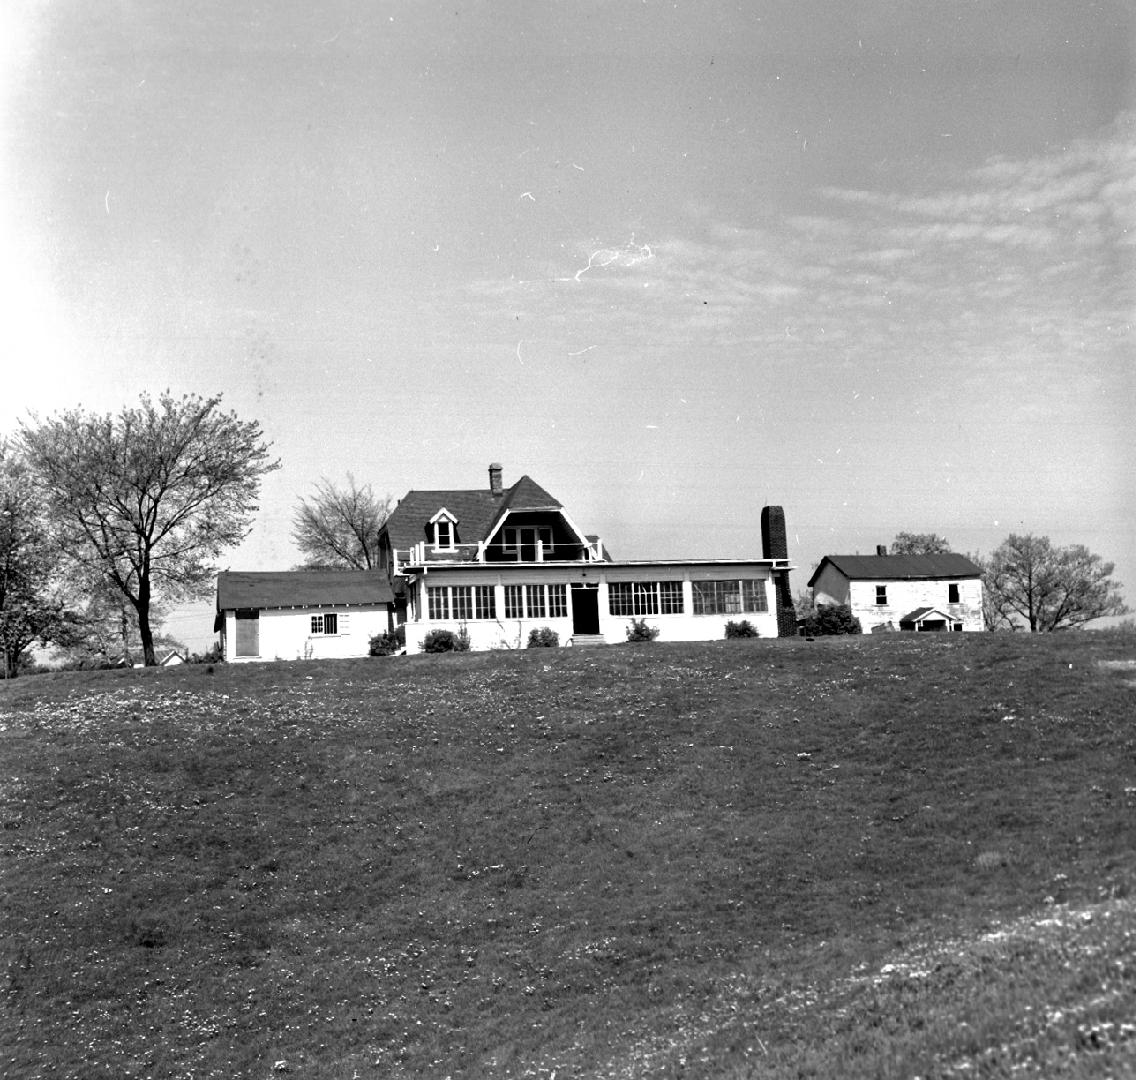 Humber Valley Golf Club, Dillon Avenue, east side, north of The Queensway, club house